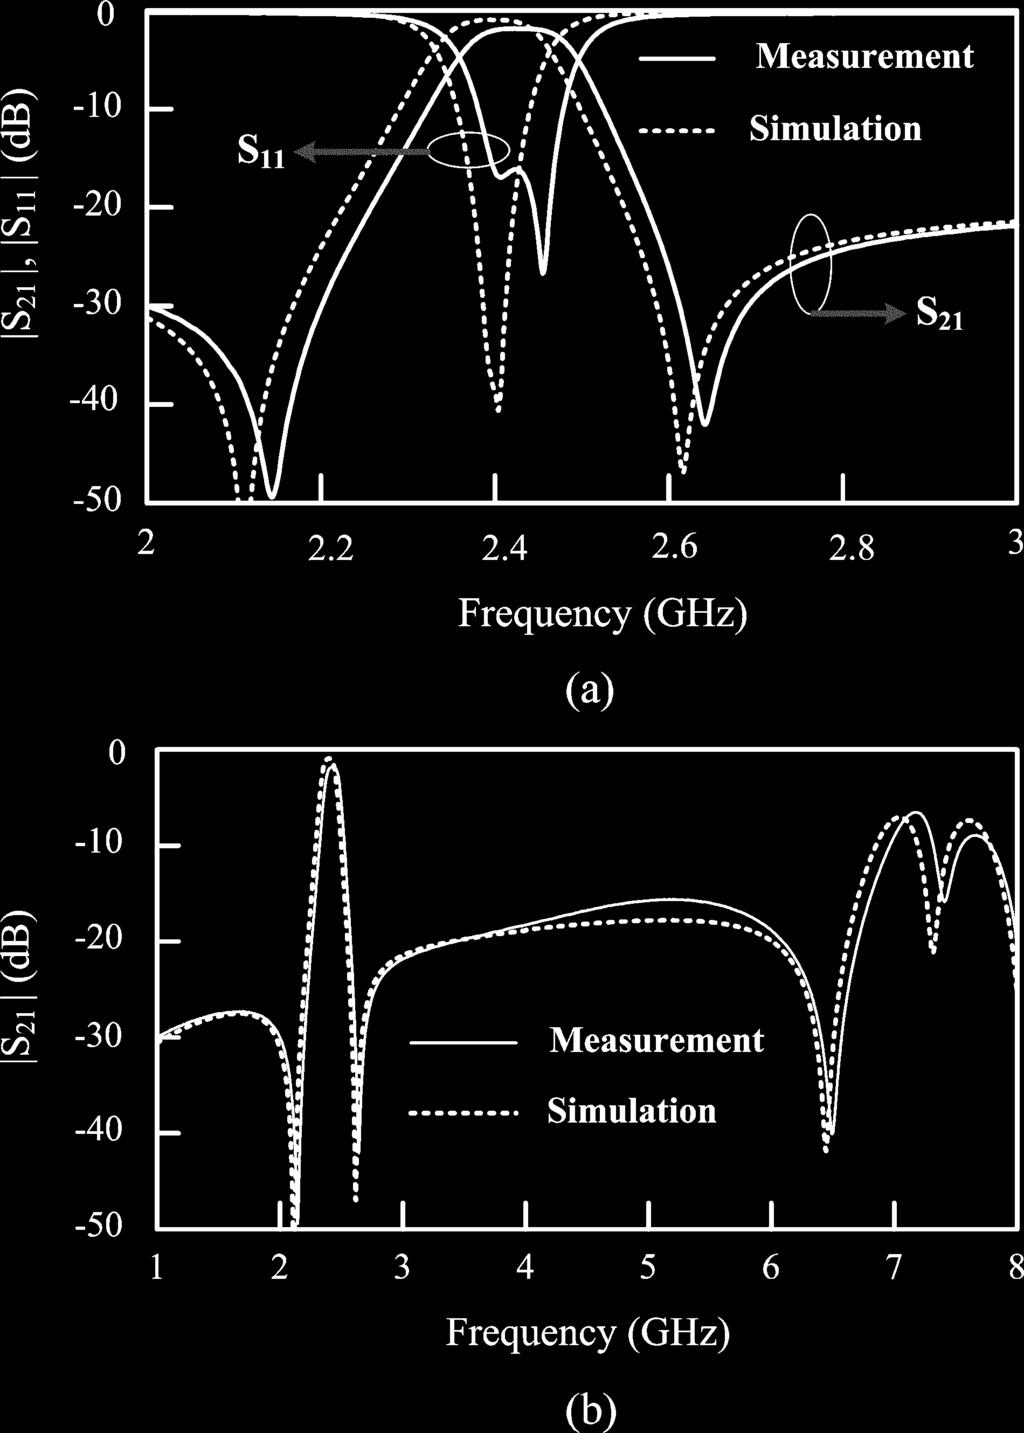 536 IEEE TRANSACTIONS ON MICROWAVE THEORY AND TECHNIQUES, VOL. 54, NO. 2, FEBRUARY 2006 Fig. 4. Measured and simulated results of the proposed second-order microstrip filter in Fig. 1(a).